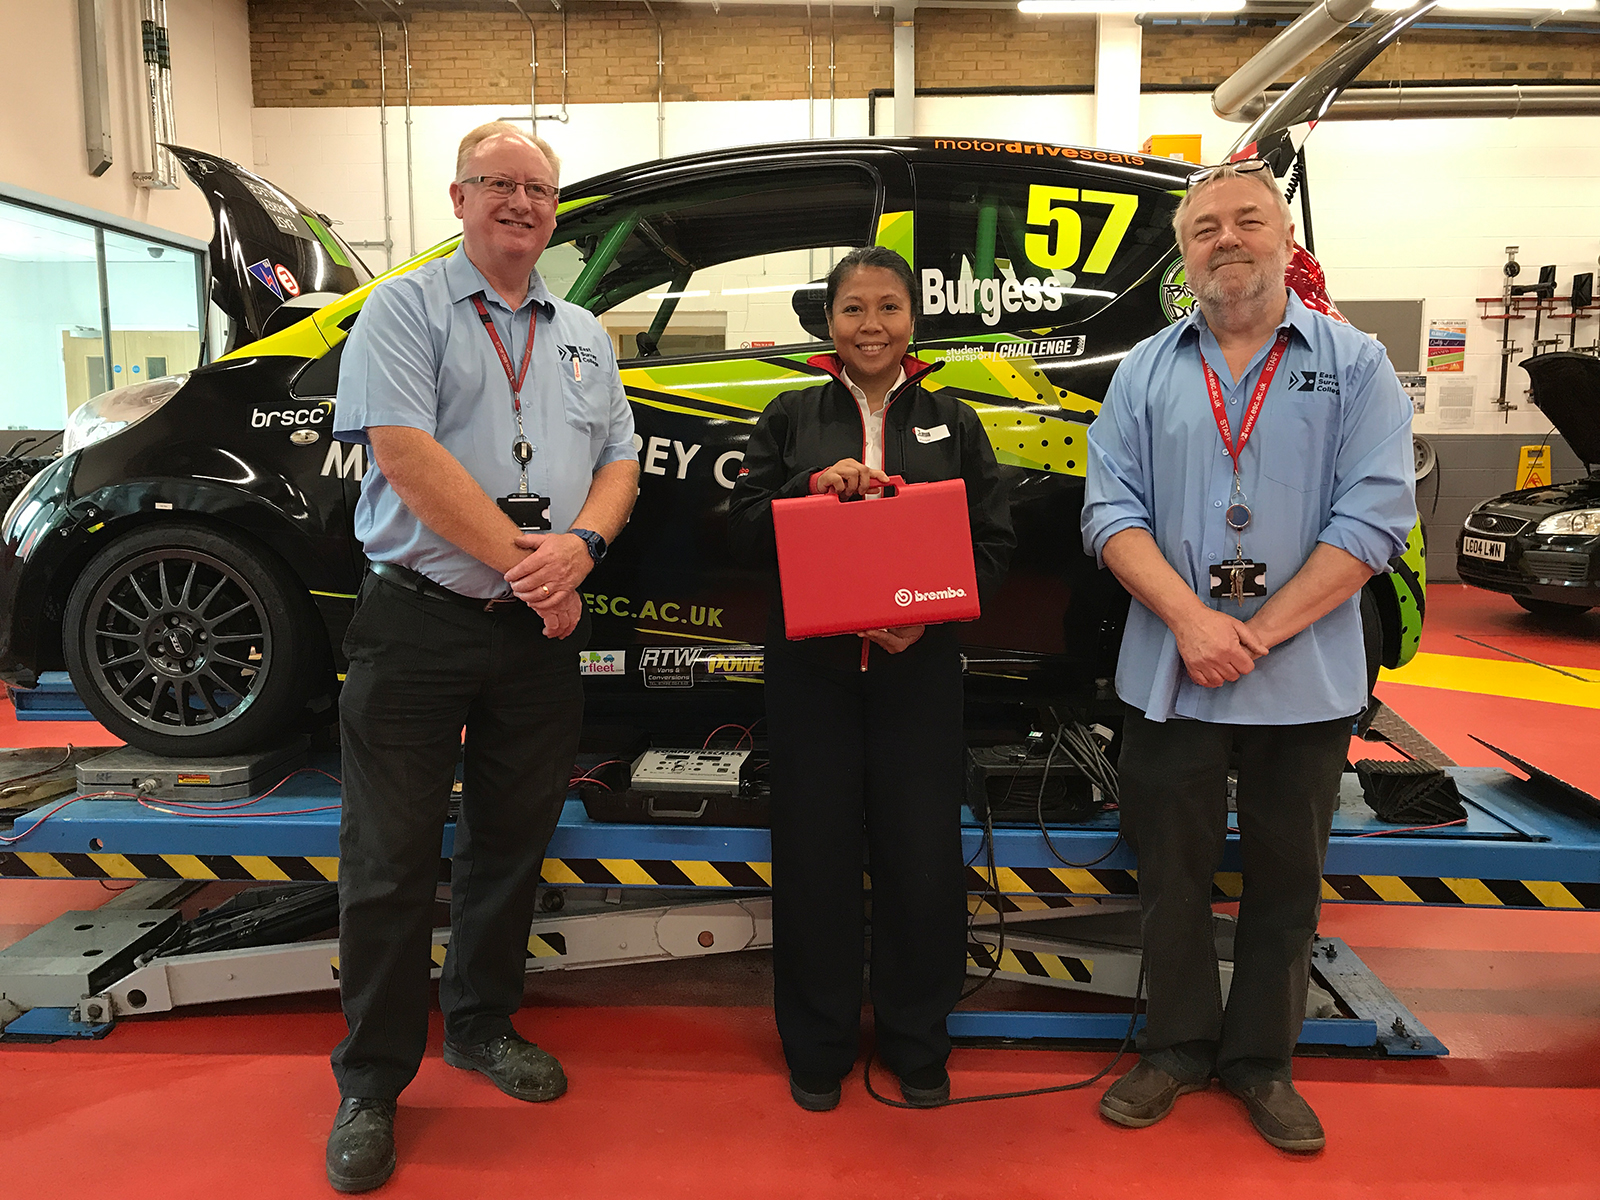 A representative from Brembo Brakes presents a prize to East Surrey College's Motor Vehicle Department